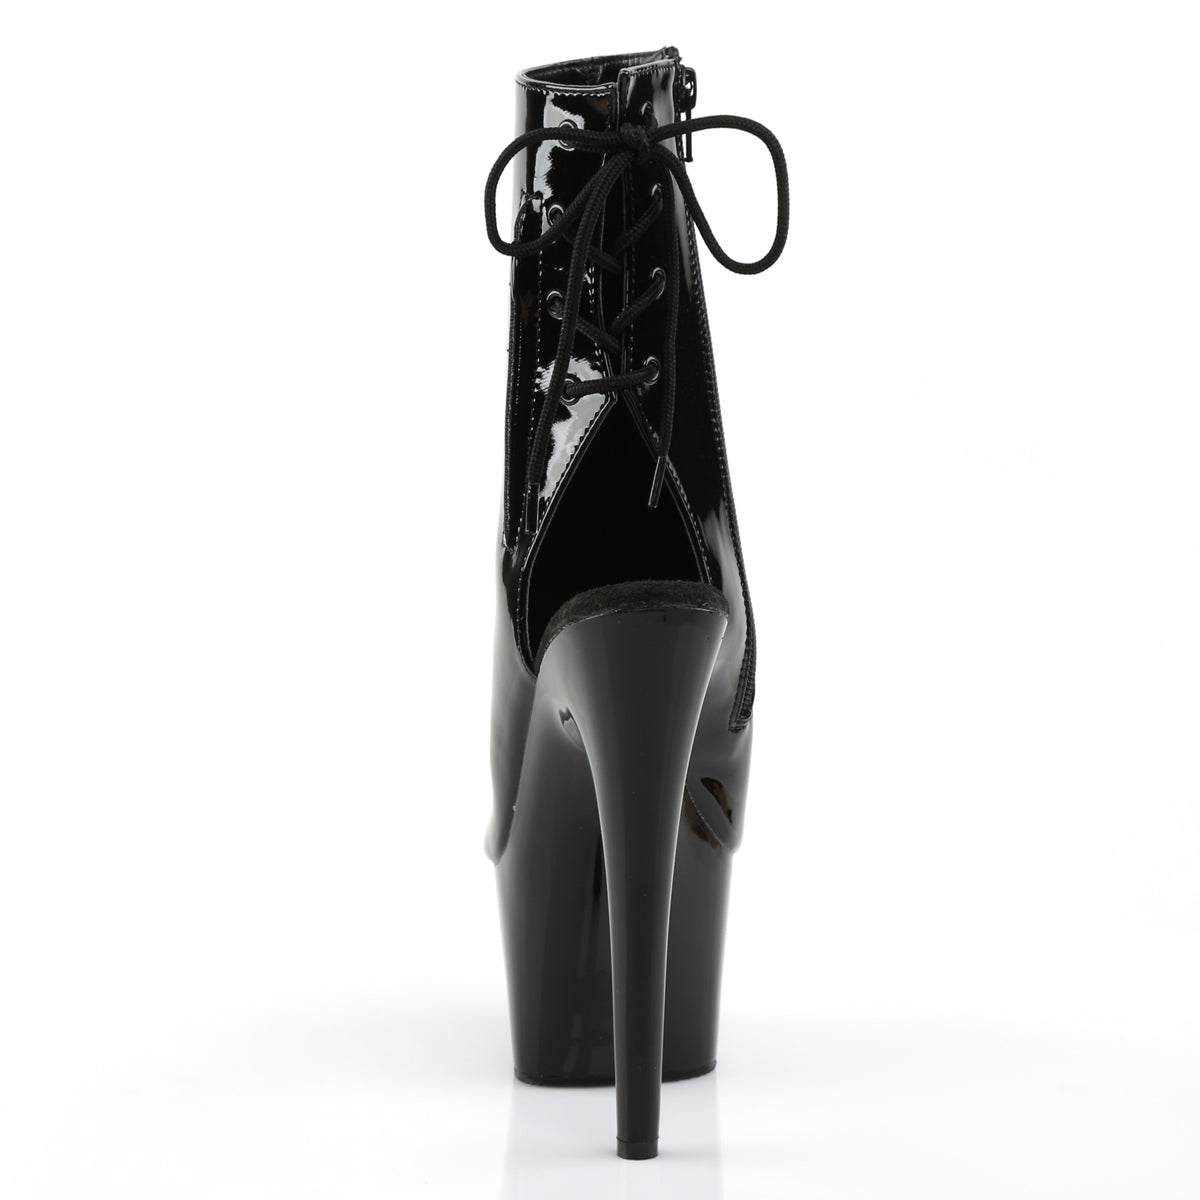 ADORE-1018 7" Heel Black Patent Strippers Ankle Boots-Pleaser- Sexy Shoes Fetish Footwear